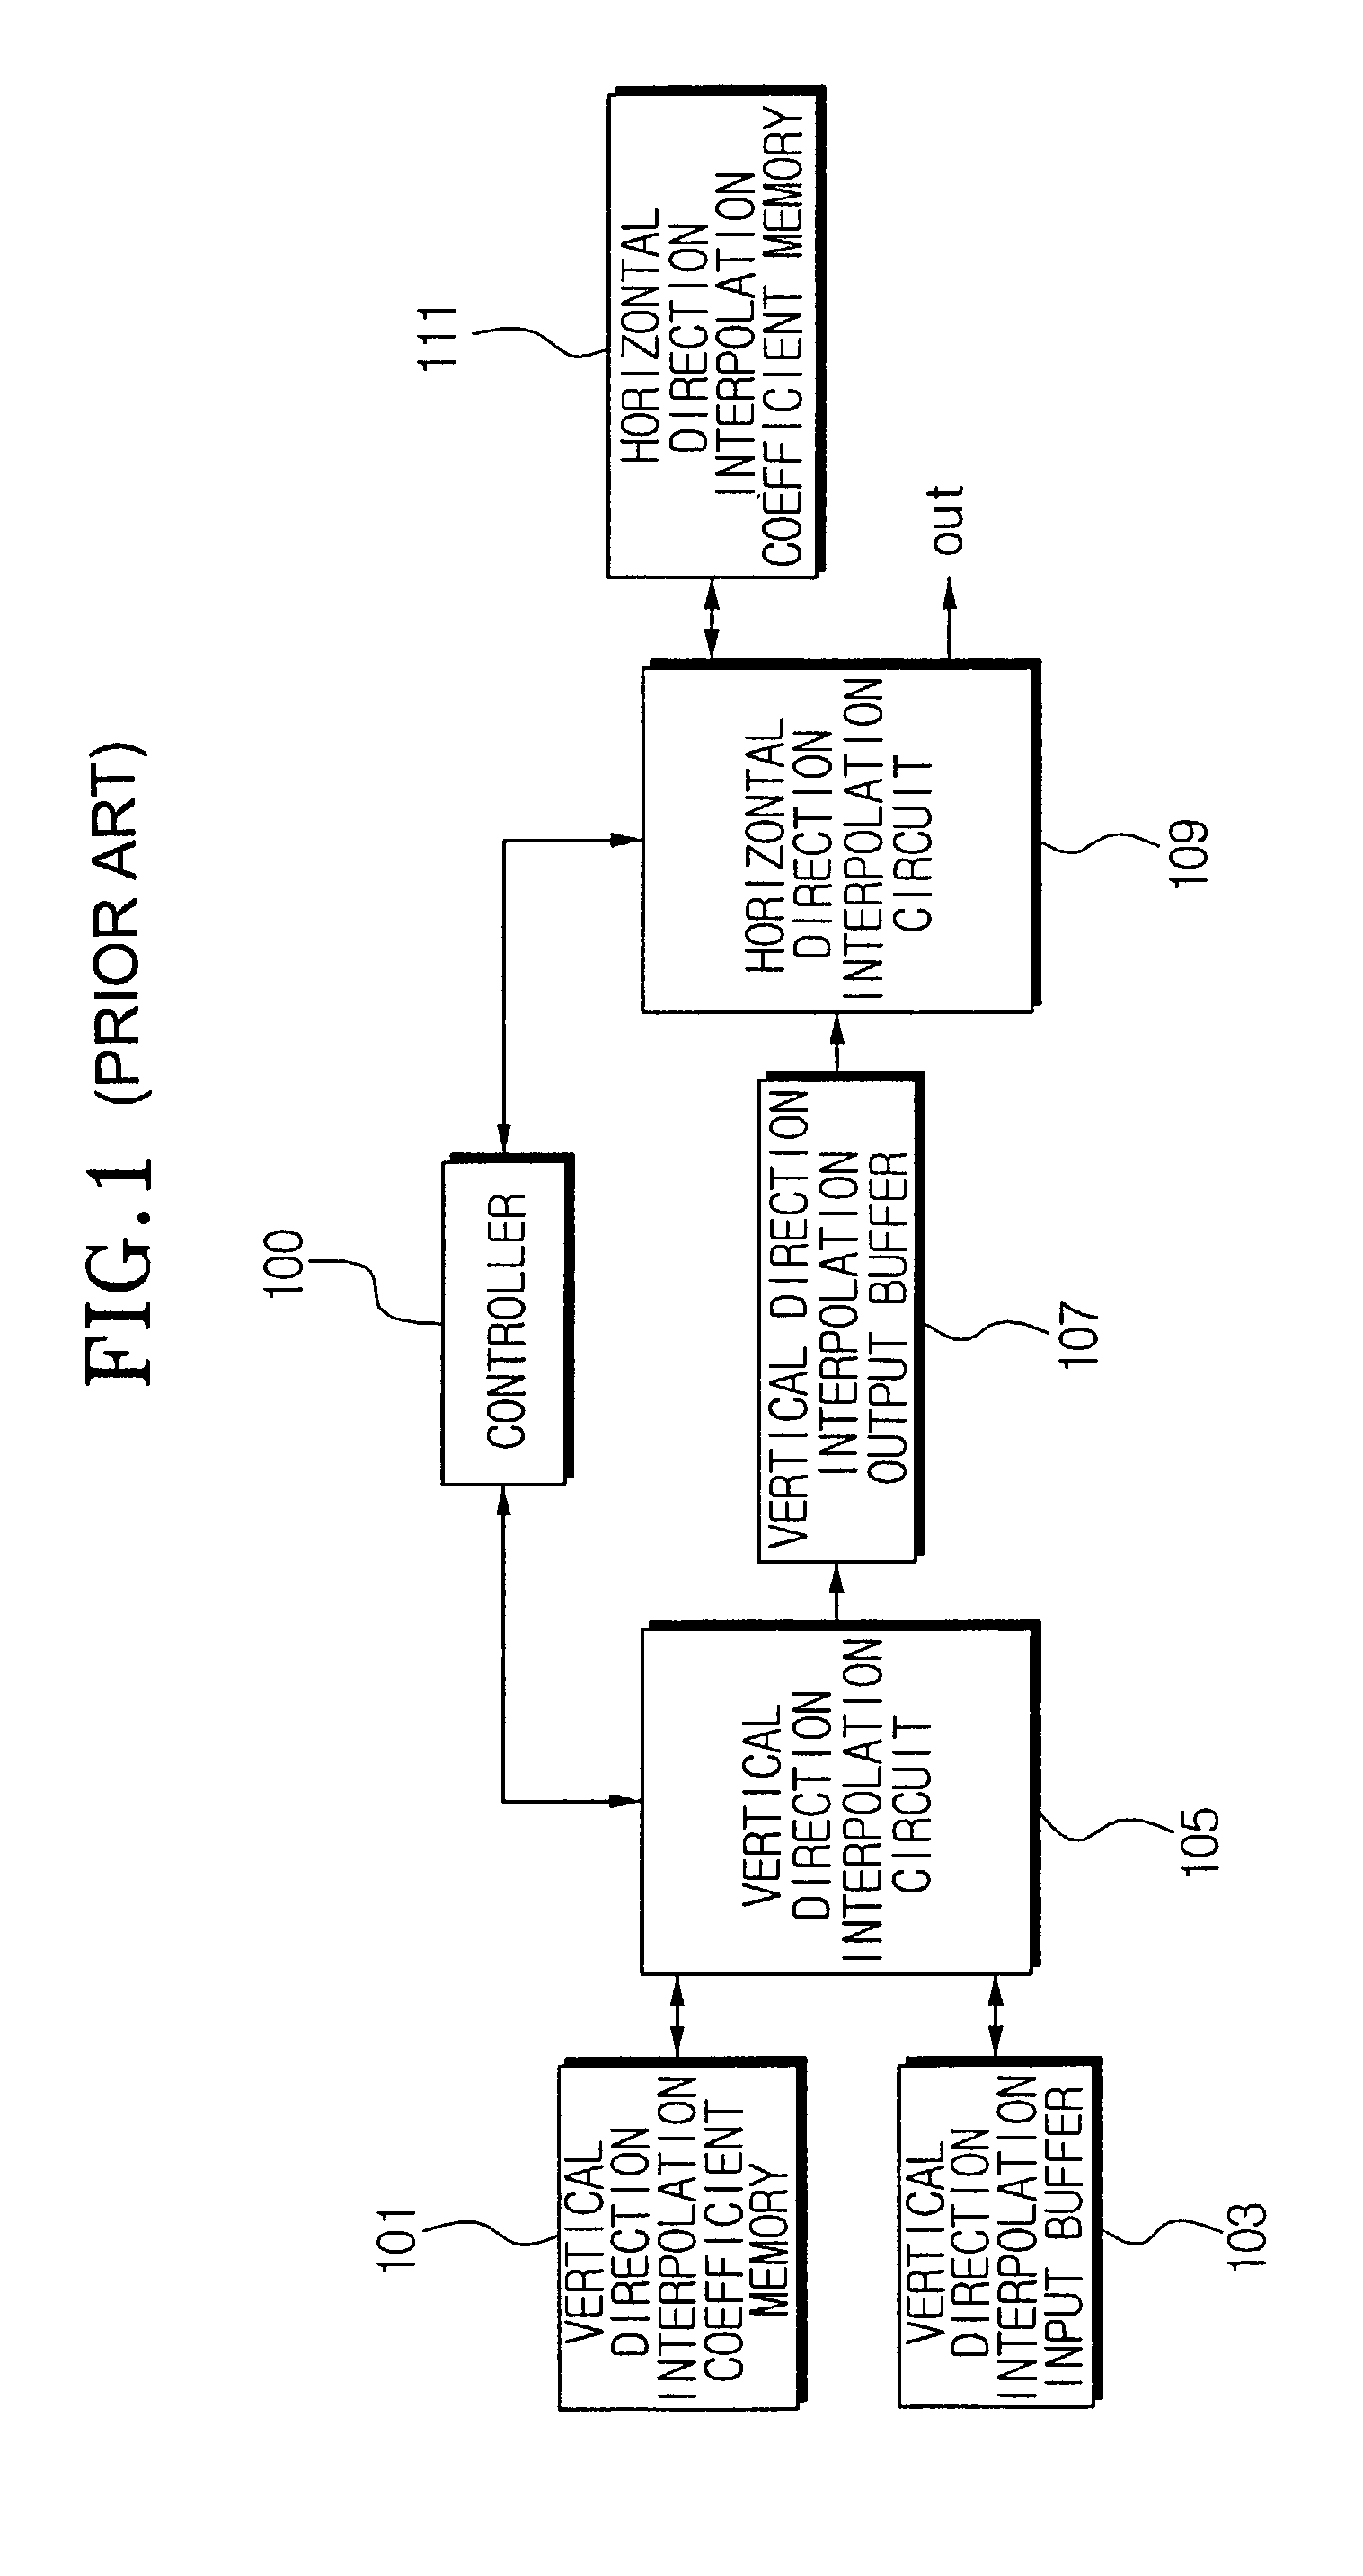 Apparatus for processing digital image and method therefor